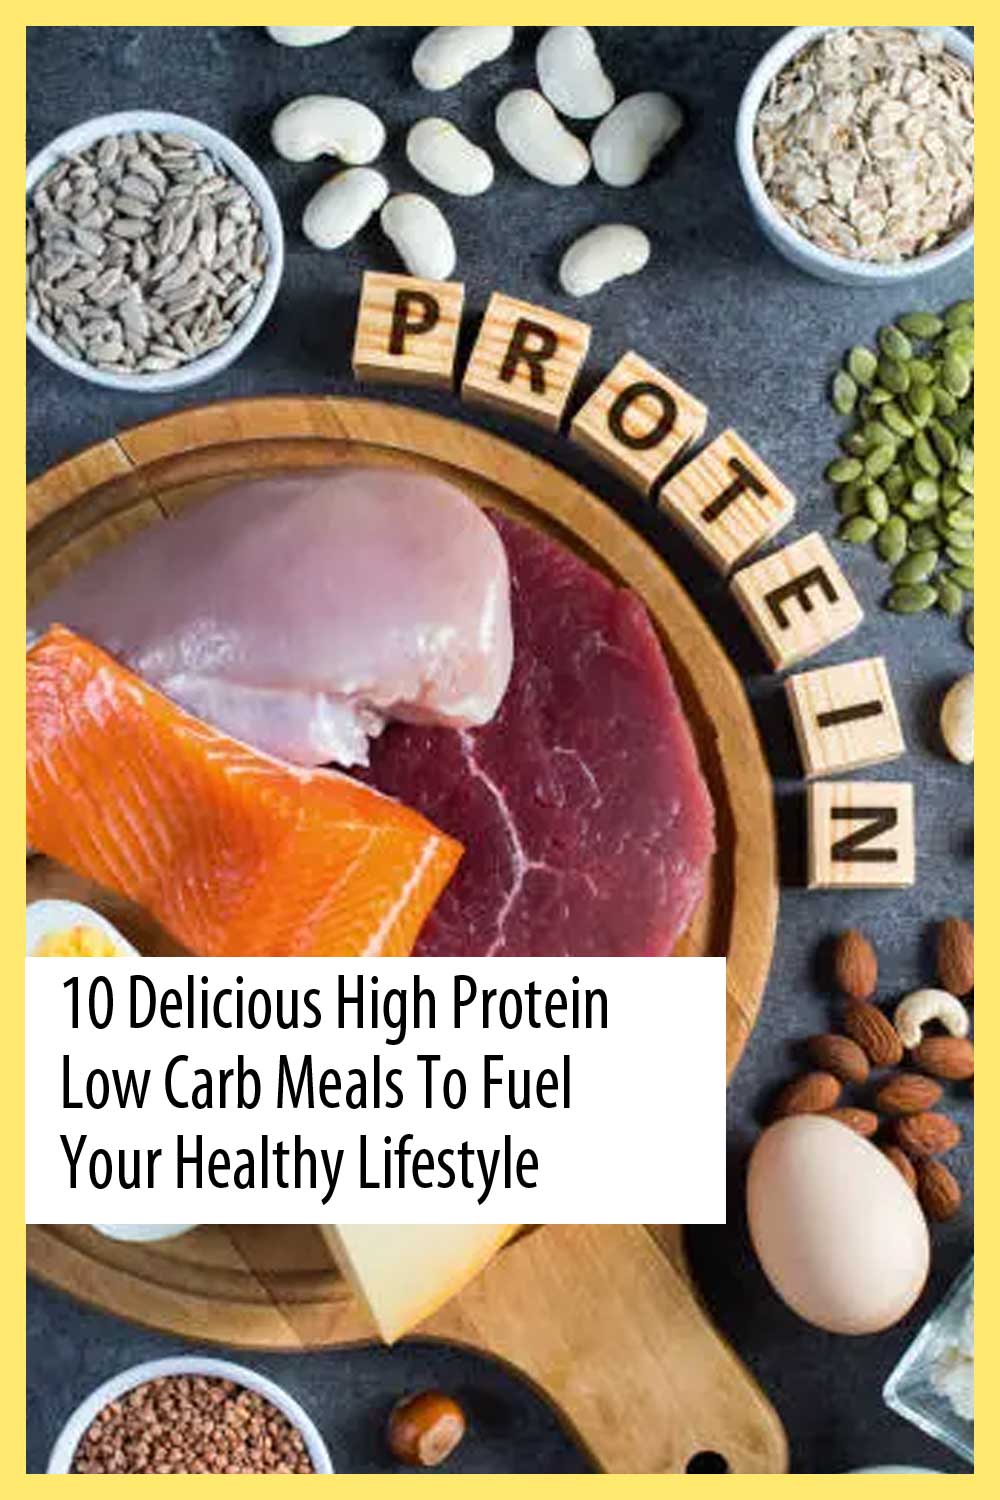 10 Delicious High Protein Low Carb Meals to Fuel Your Healthy Lifestyle